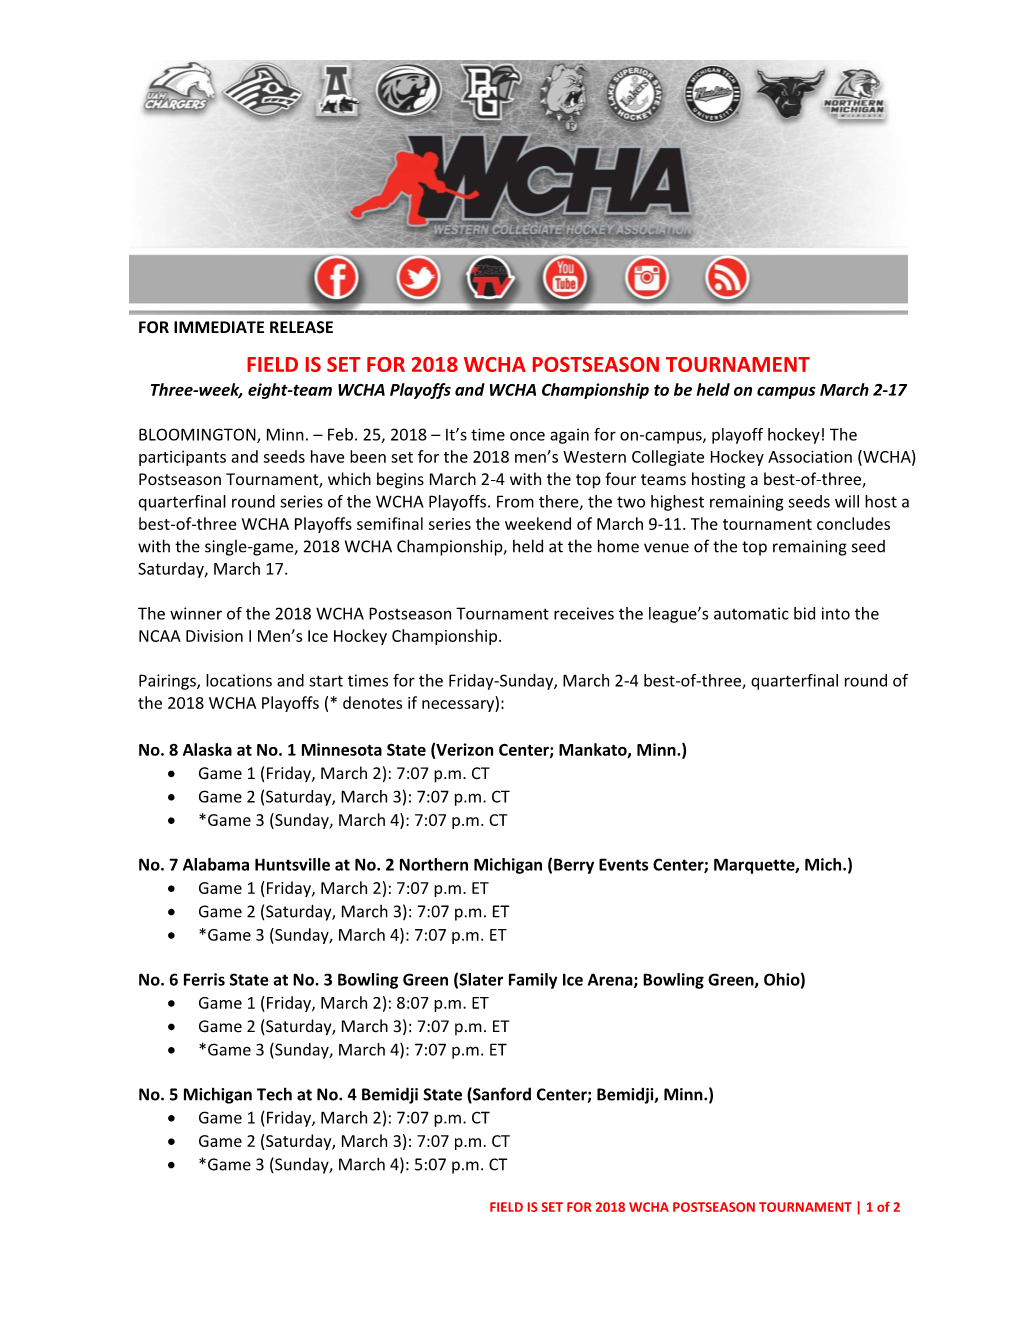 FIELD IS SET for 2018 WCHA POSTSEASON TOURNAMENT Three-Week, Eight-Team WCHA Playoffs and WCHA Championship to Be Held on Campus March 2-17